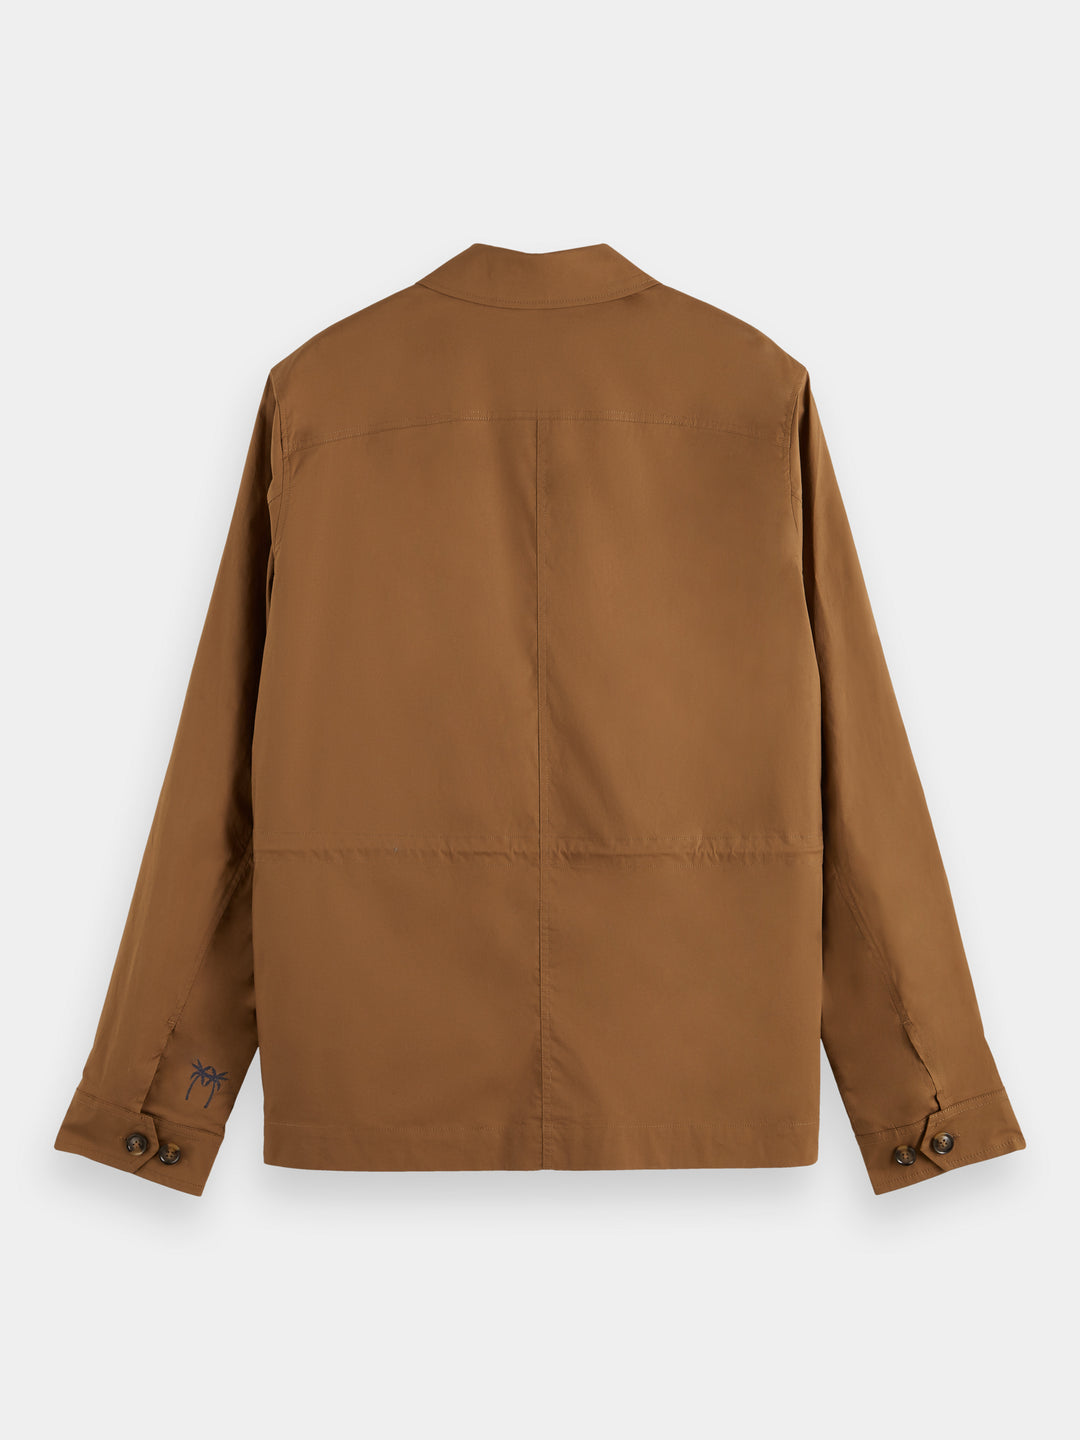 Worker Jacket in Taupe | Buster McGee